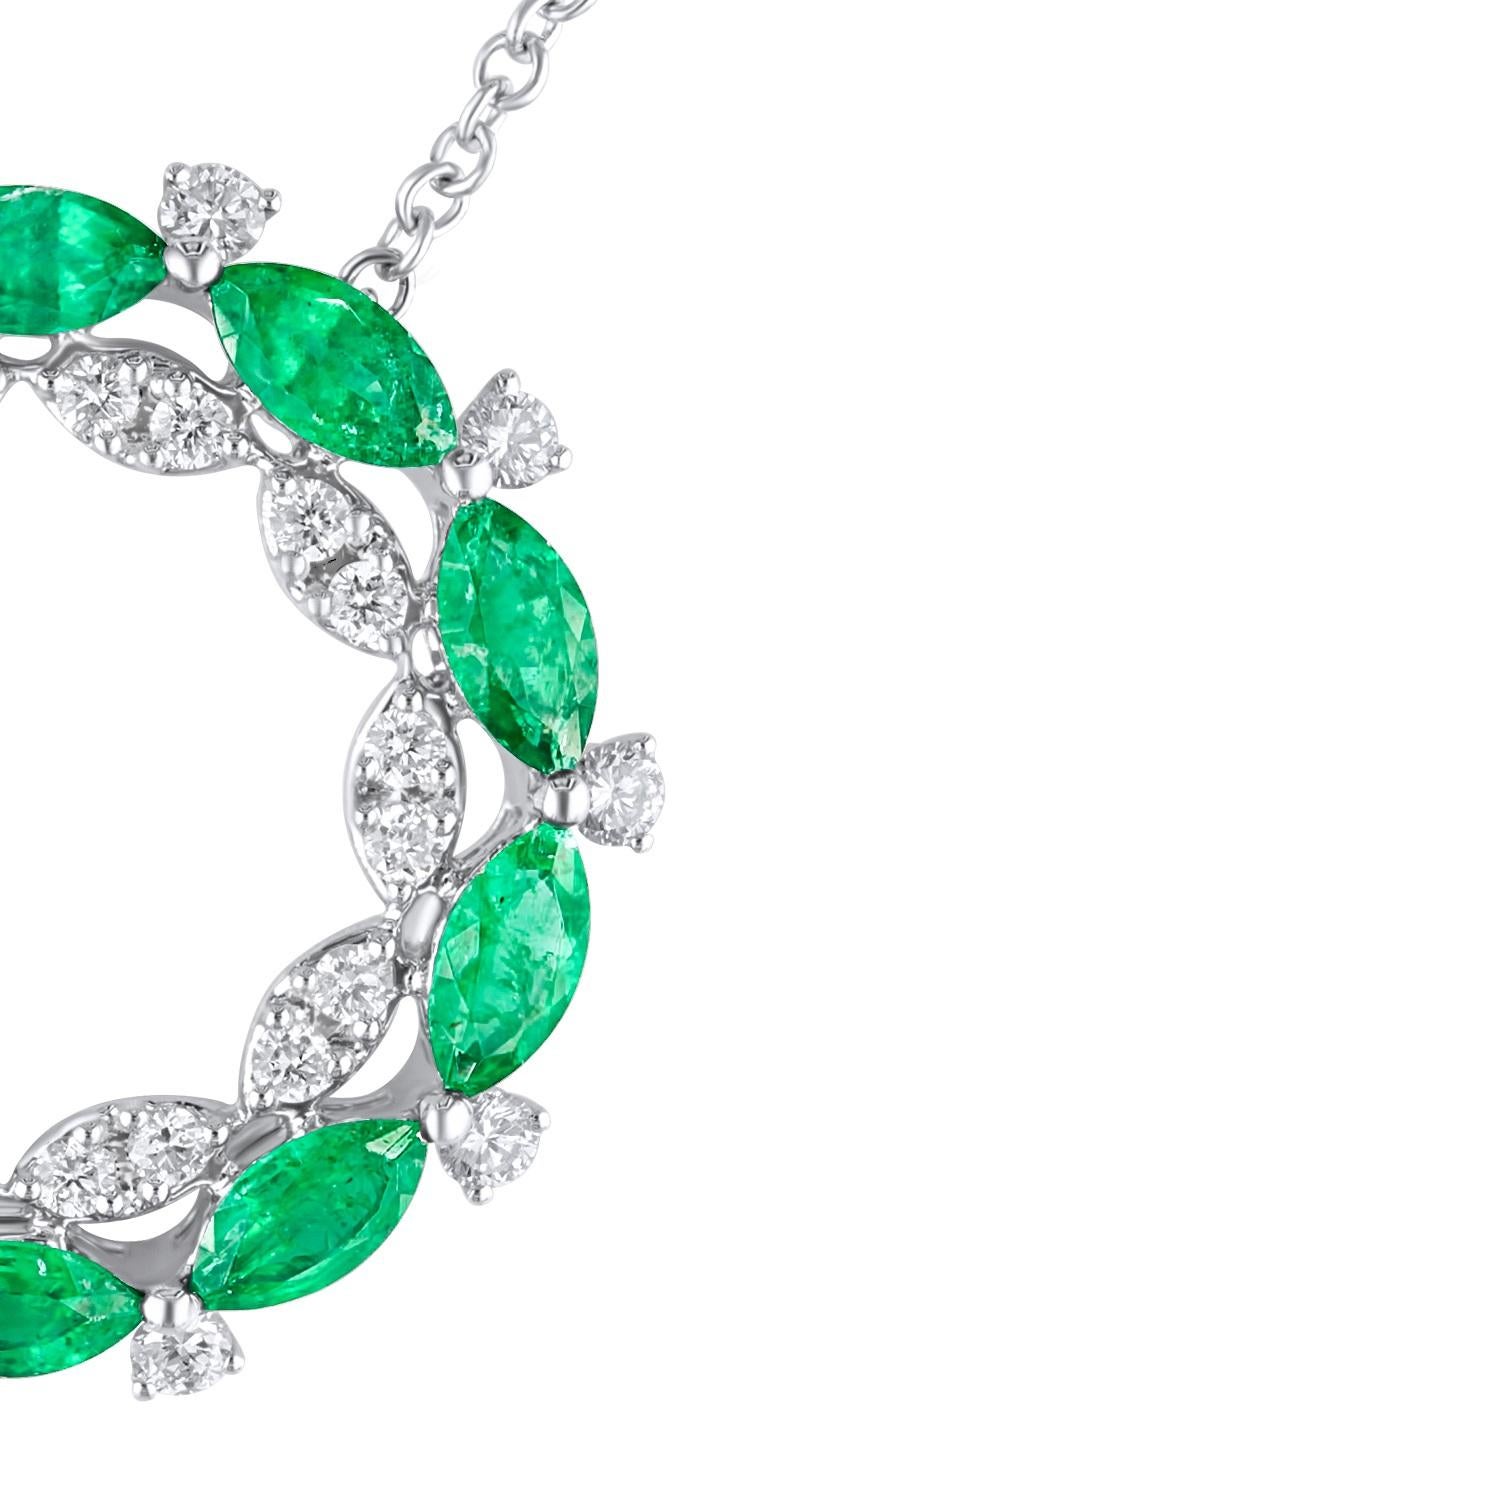 This beautiful circle pendant set in 18k White gold features a series of marquise cut emeralds (total weight 2.13 carats) alternating with round natural diamonds. Additional round diamonds form a circle of marquise forms, bringing the total diamond